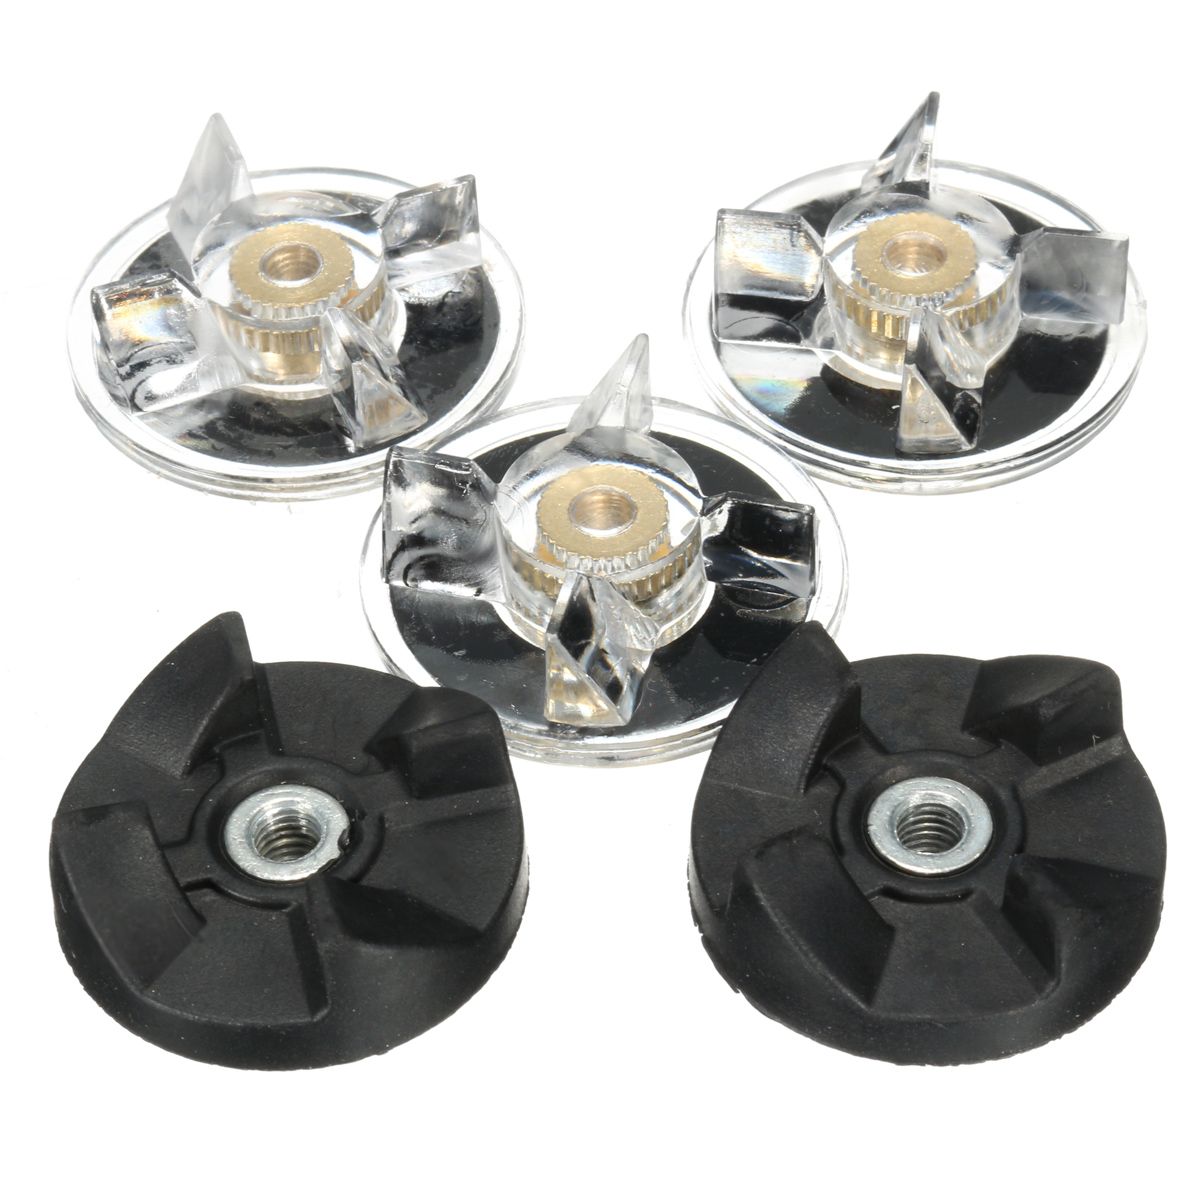 3-Plastic-Gear-Base-and-2-Rubber-Blender-Replacement-for-Magic-Mixer-Spare-Parts-1617839